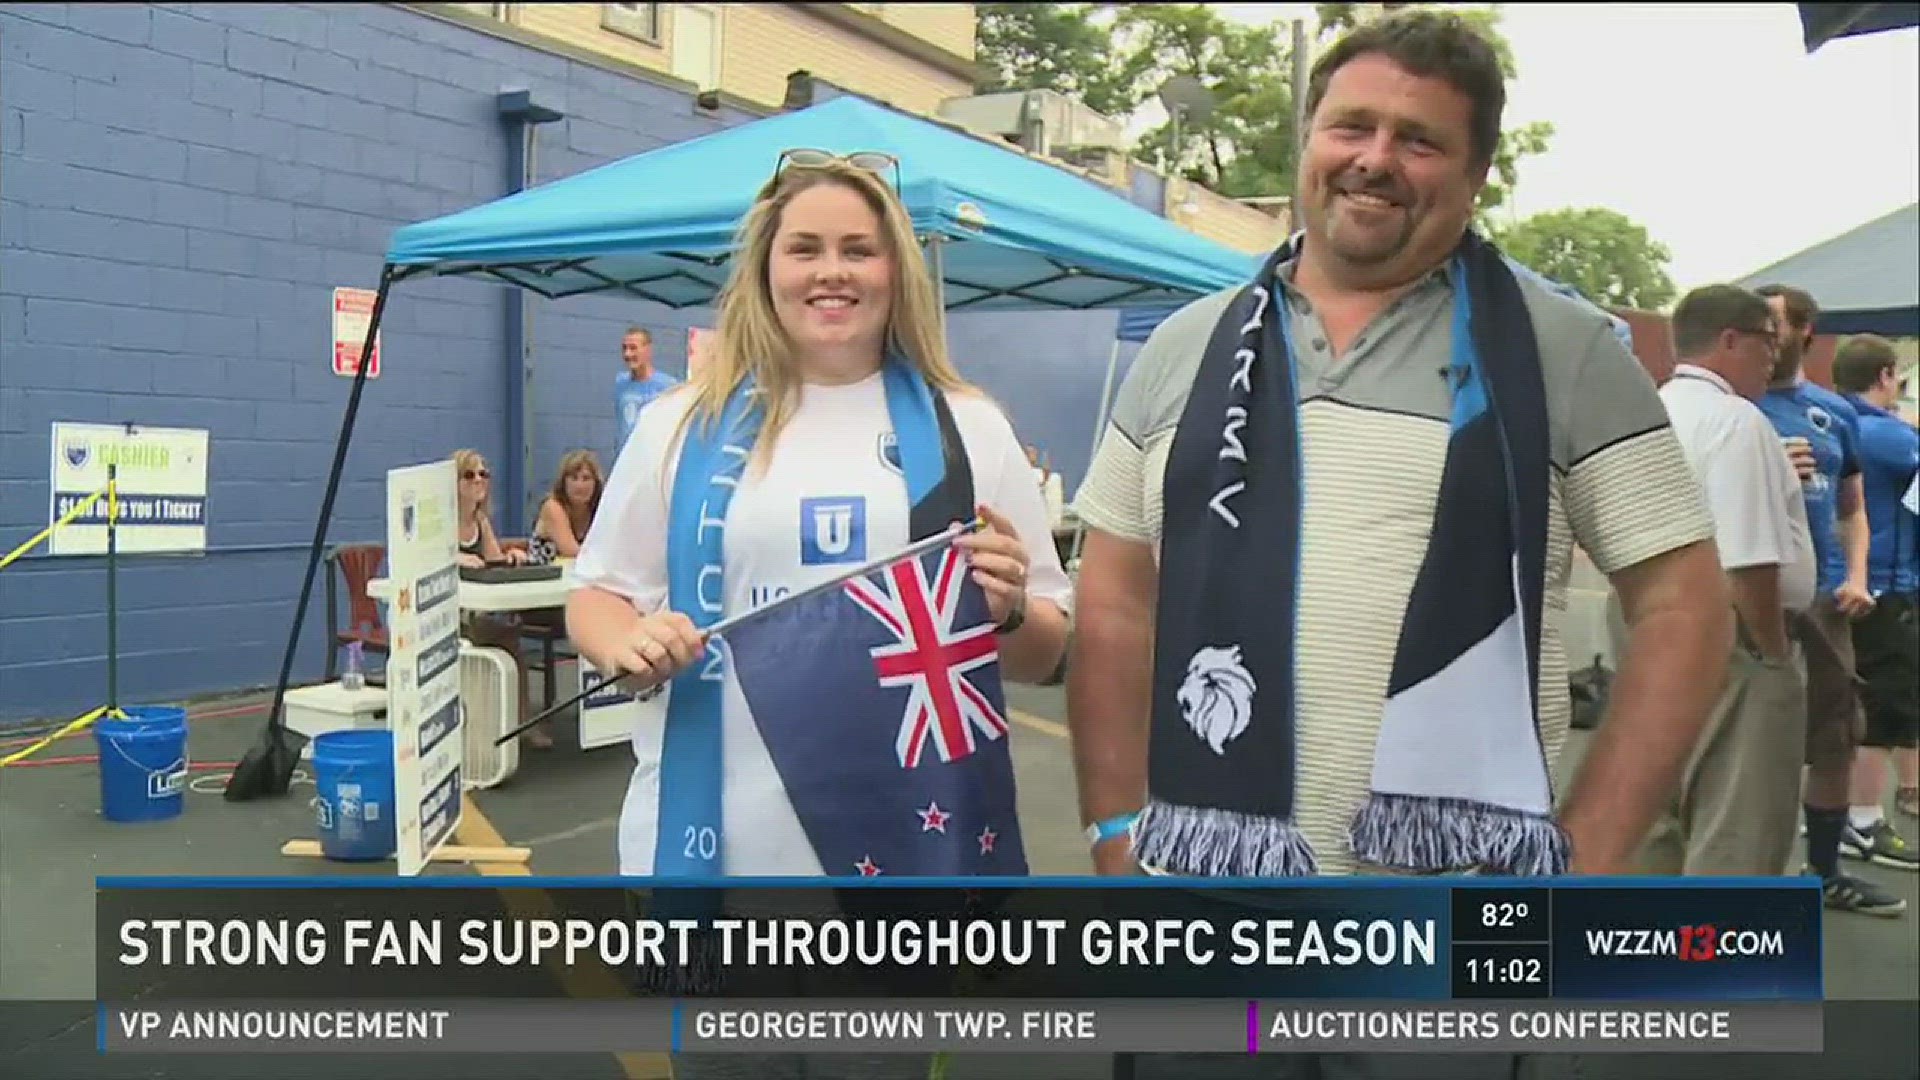 Supporters of the Grand Rapids Football Club or the Grand Army, headed to Bob's Bar to get pumped before Saturday's big match.